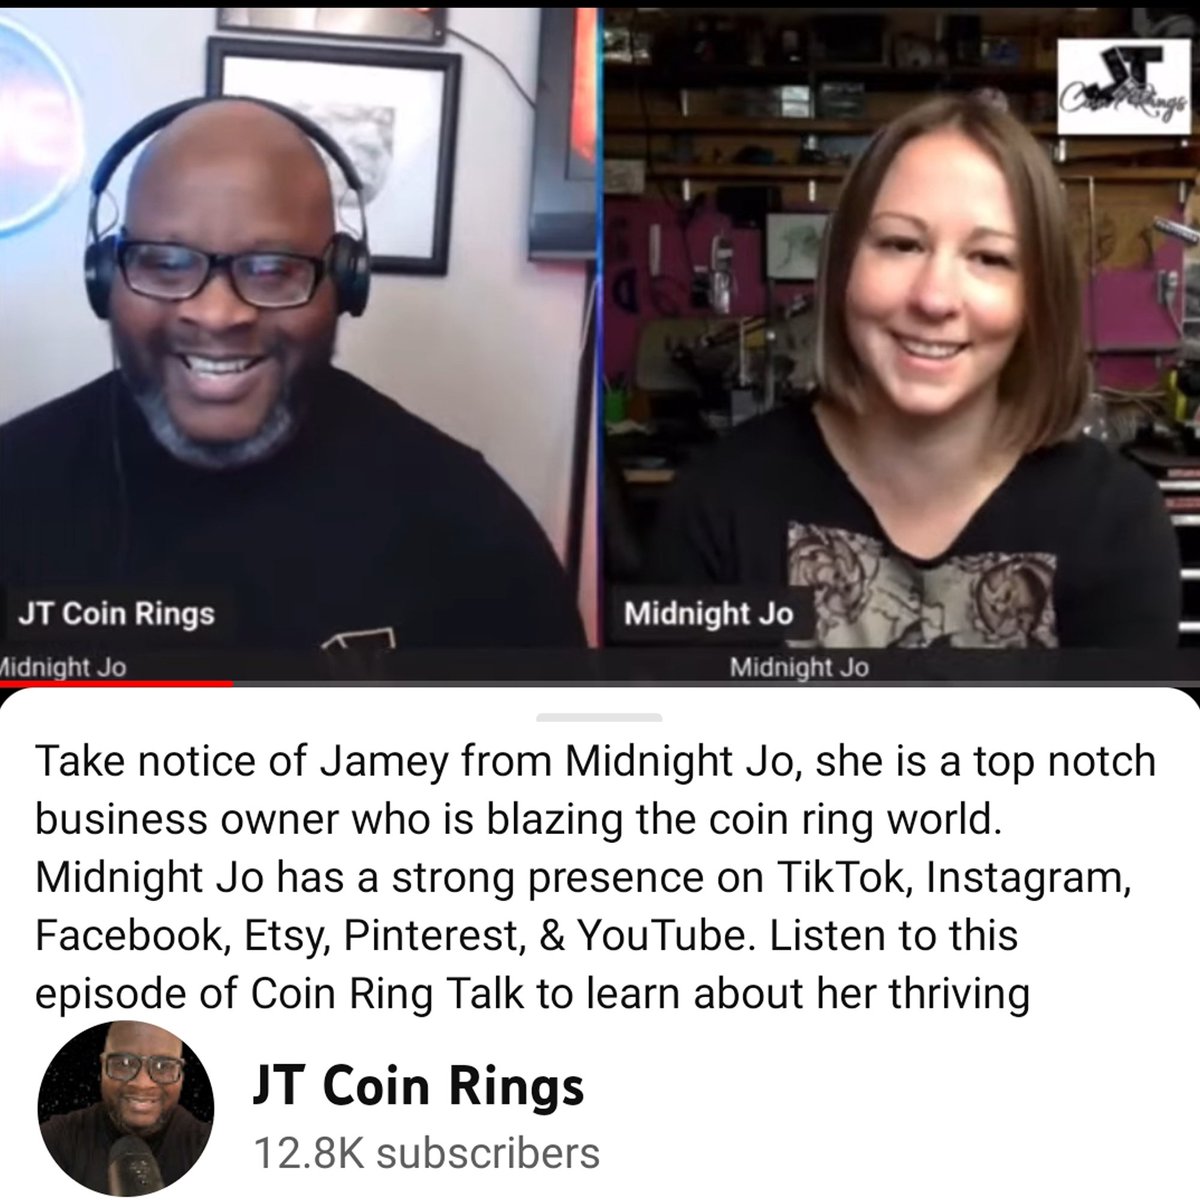 Join me and @jtcoinrings2 on Coin Ring talk while we discuss running a handmade business!

Check it out on JT's YouTube channel >>> youtu.be/dy-AG6JT6jM

#jtcoinrings #midnightjo #coinrings #coinring #coinjewelry #spoonring #spoonrings #spoonjewelry #handmadebusiness